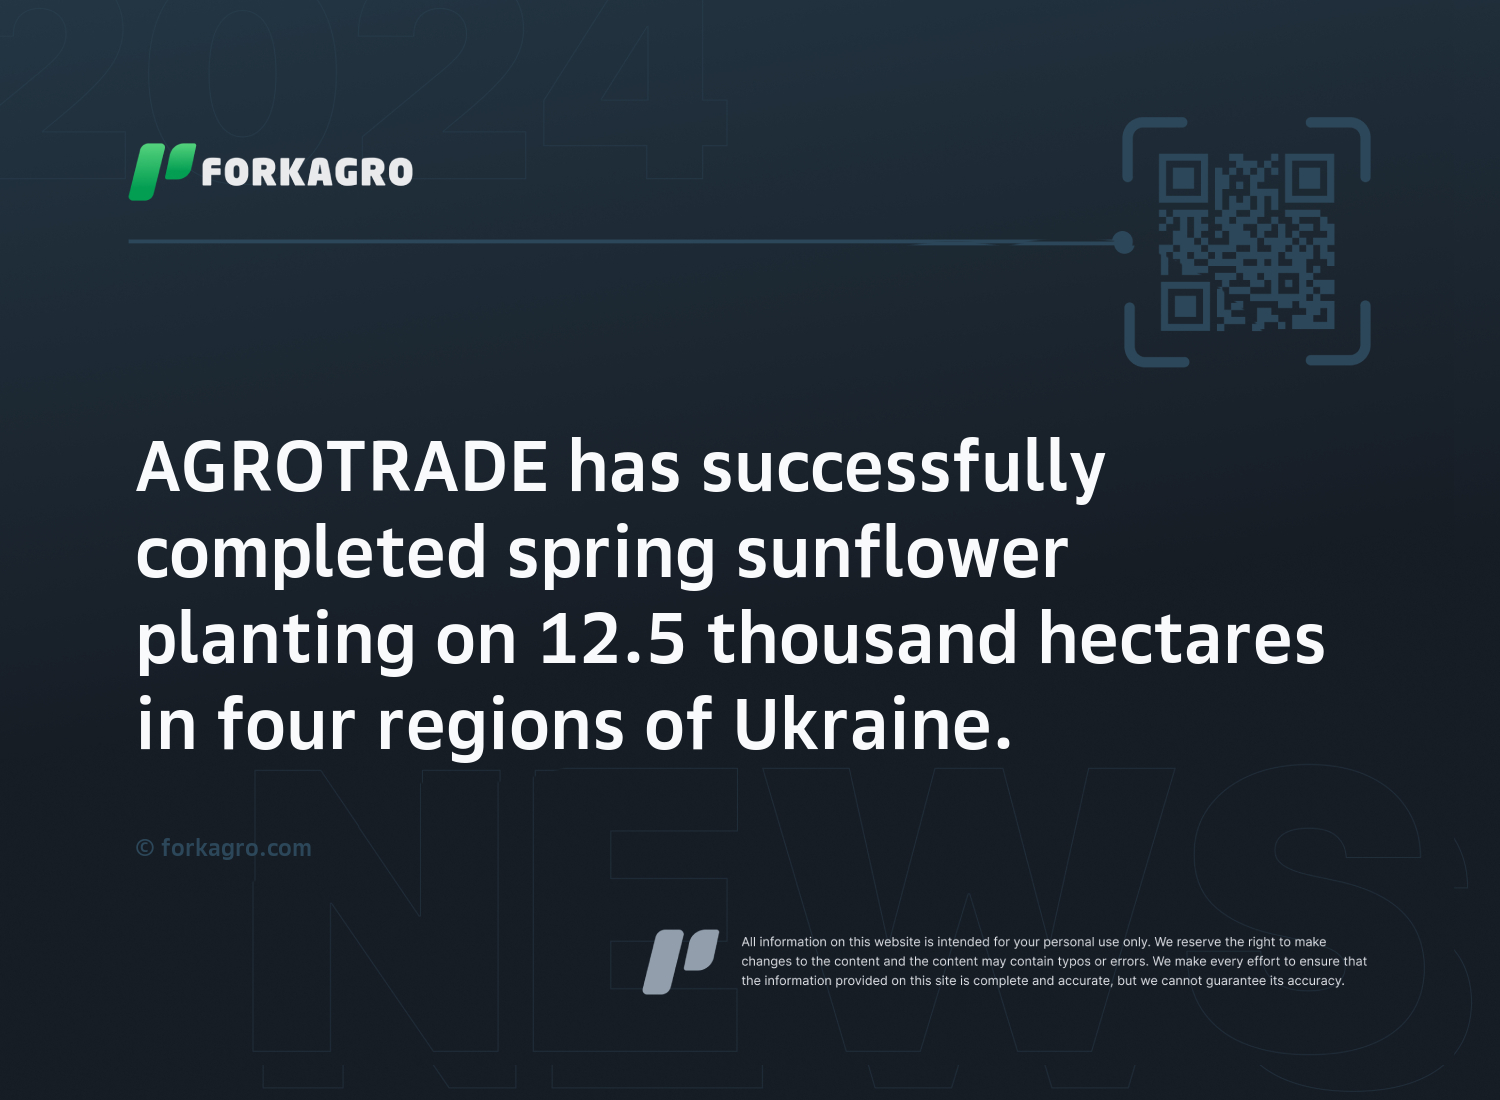 AGROTRADE has successfully completed spring sunflower planting on 12.5 thousand hectares in four regions of Ukraine.